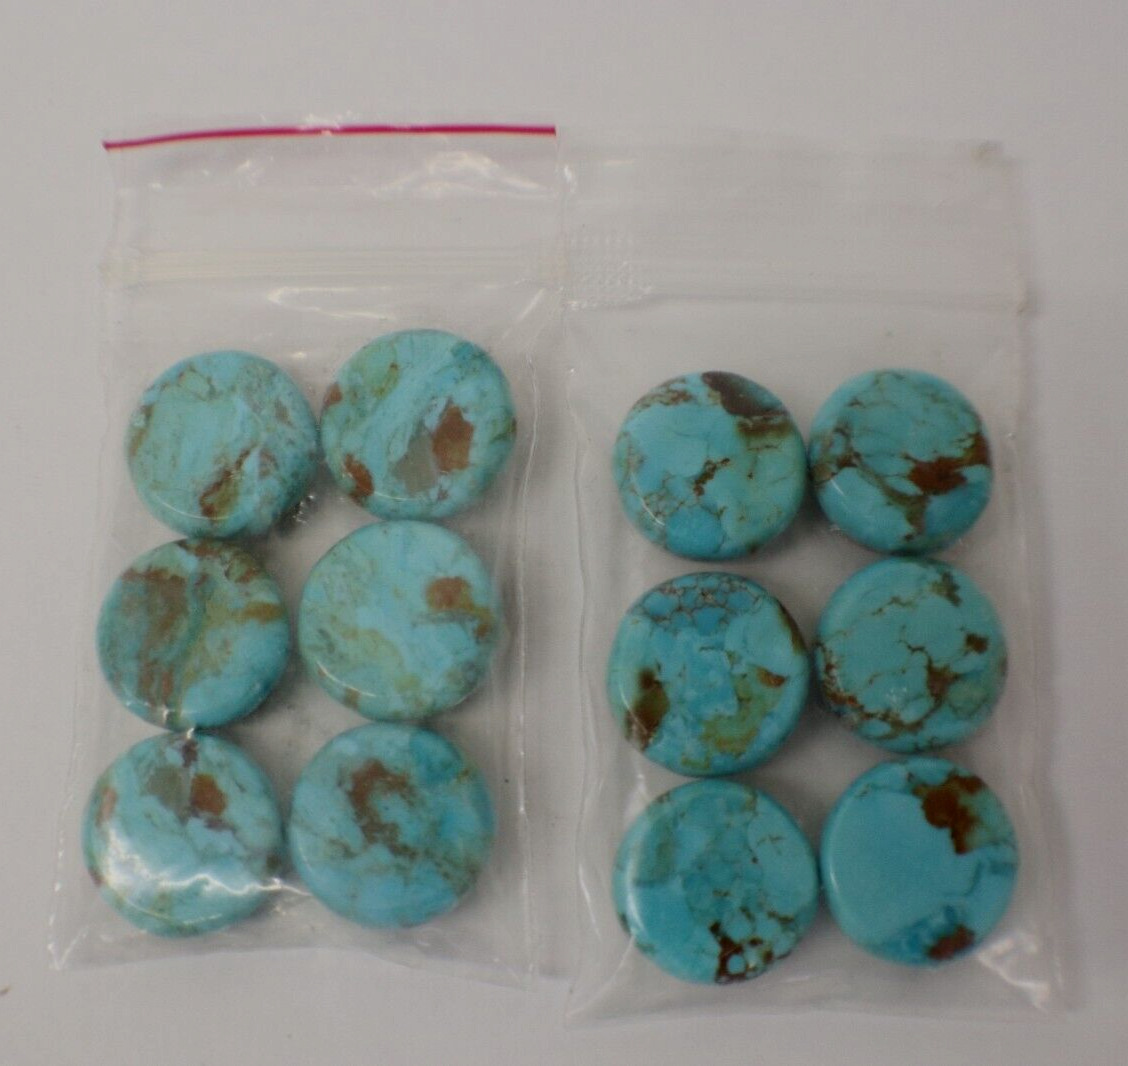 New...Lot of 12 Vintage Turquoise Style Button Covers 3/4\